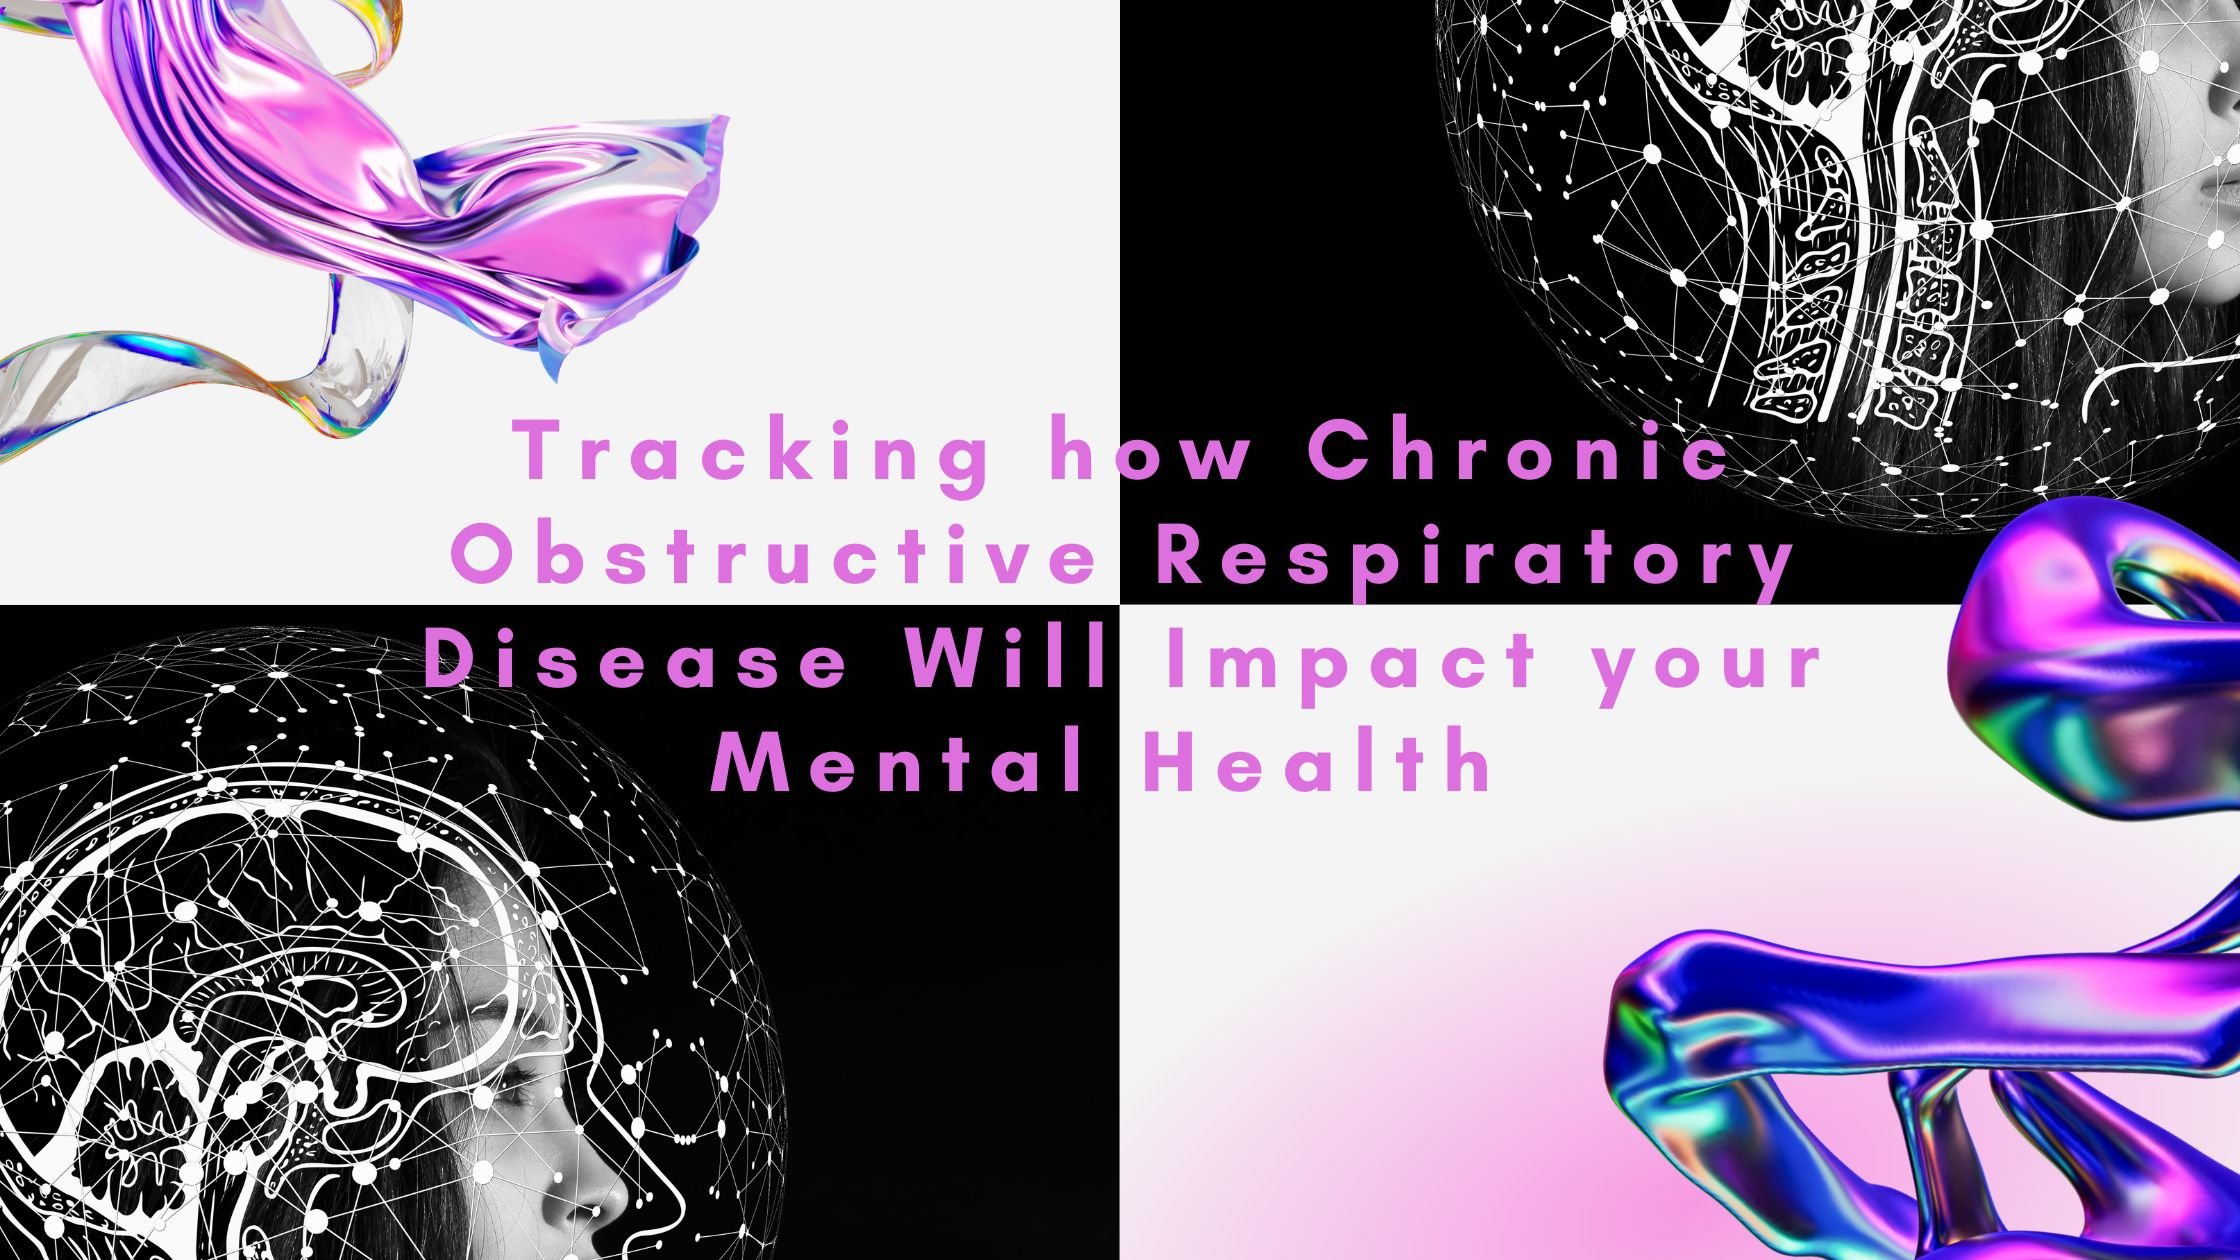 Tracking how Chronic Obstructive Respiratory Disease Will Impact your Mental Health